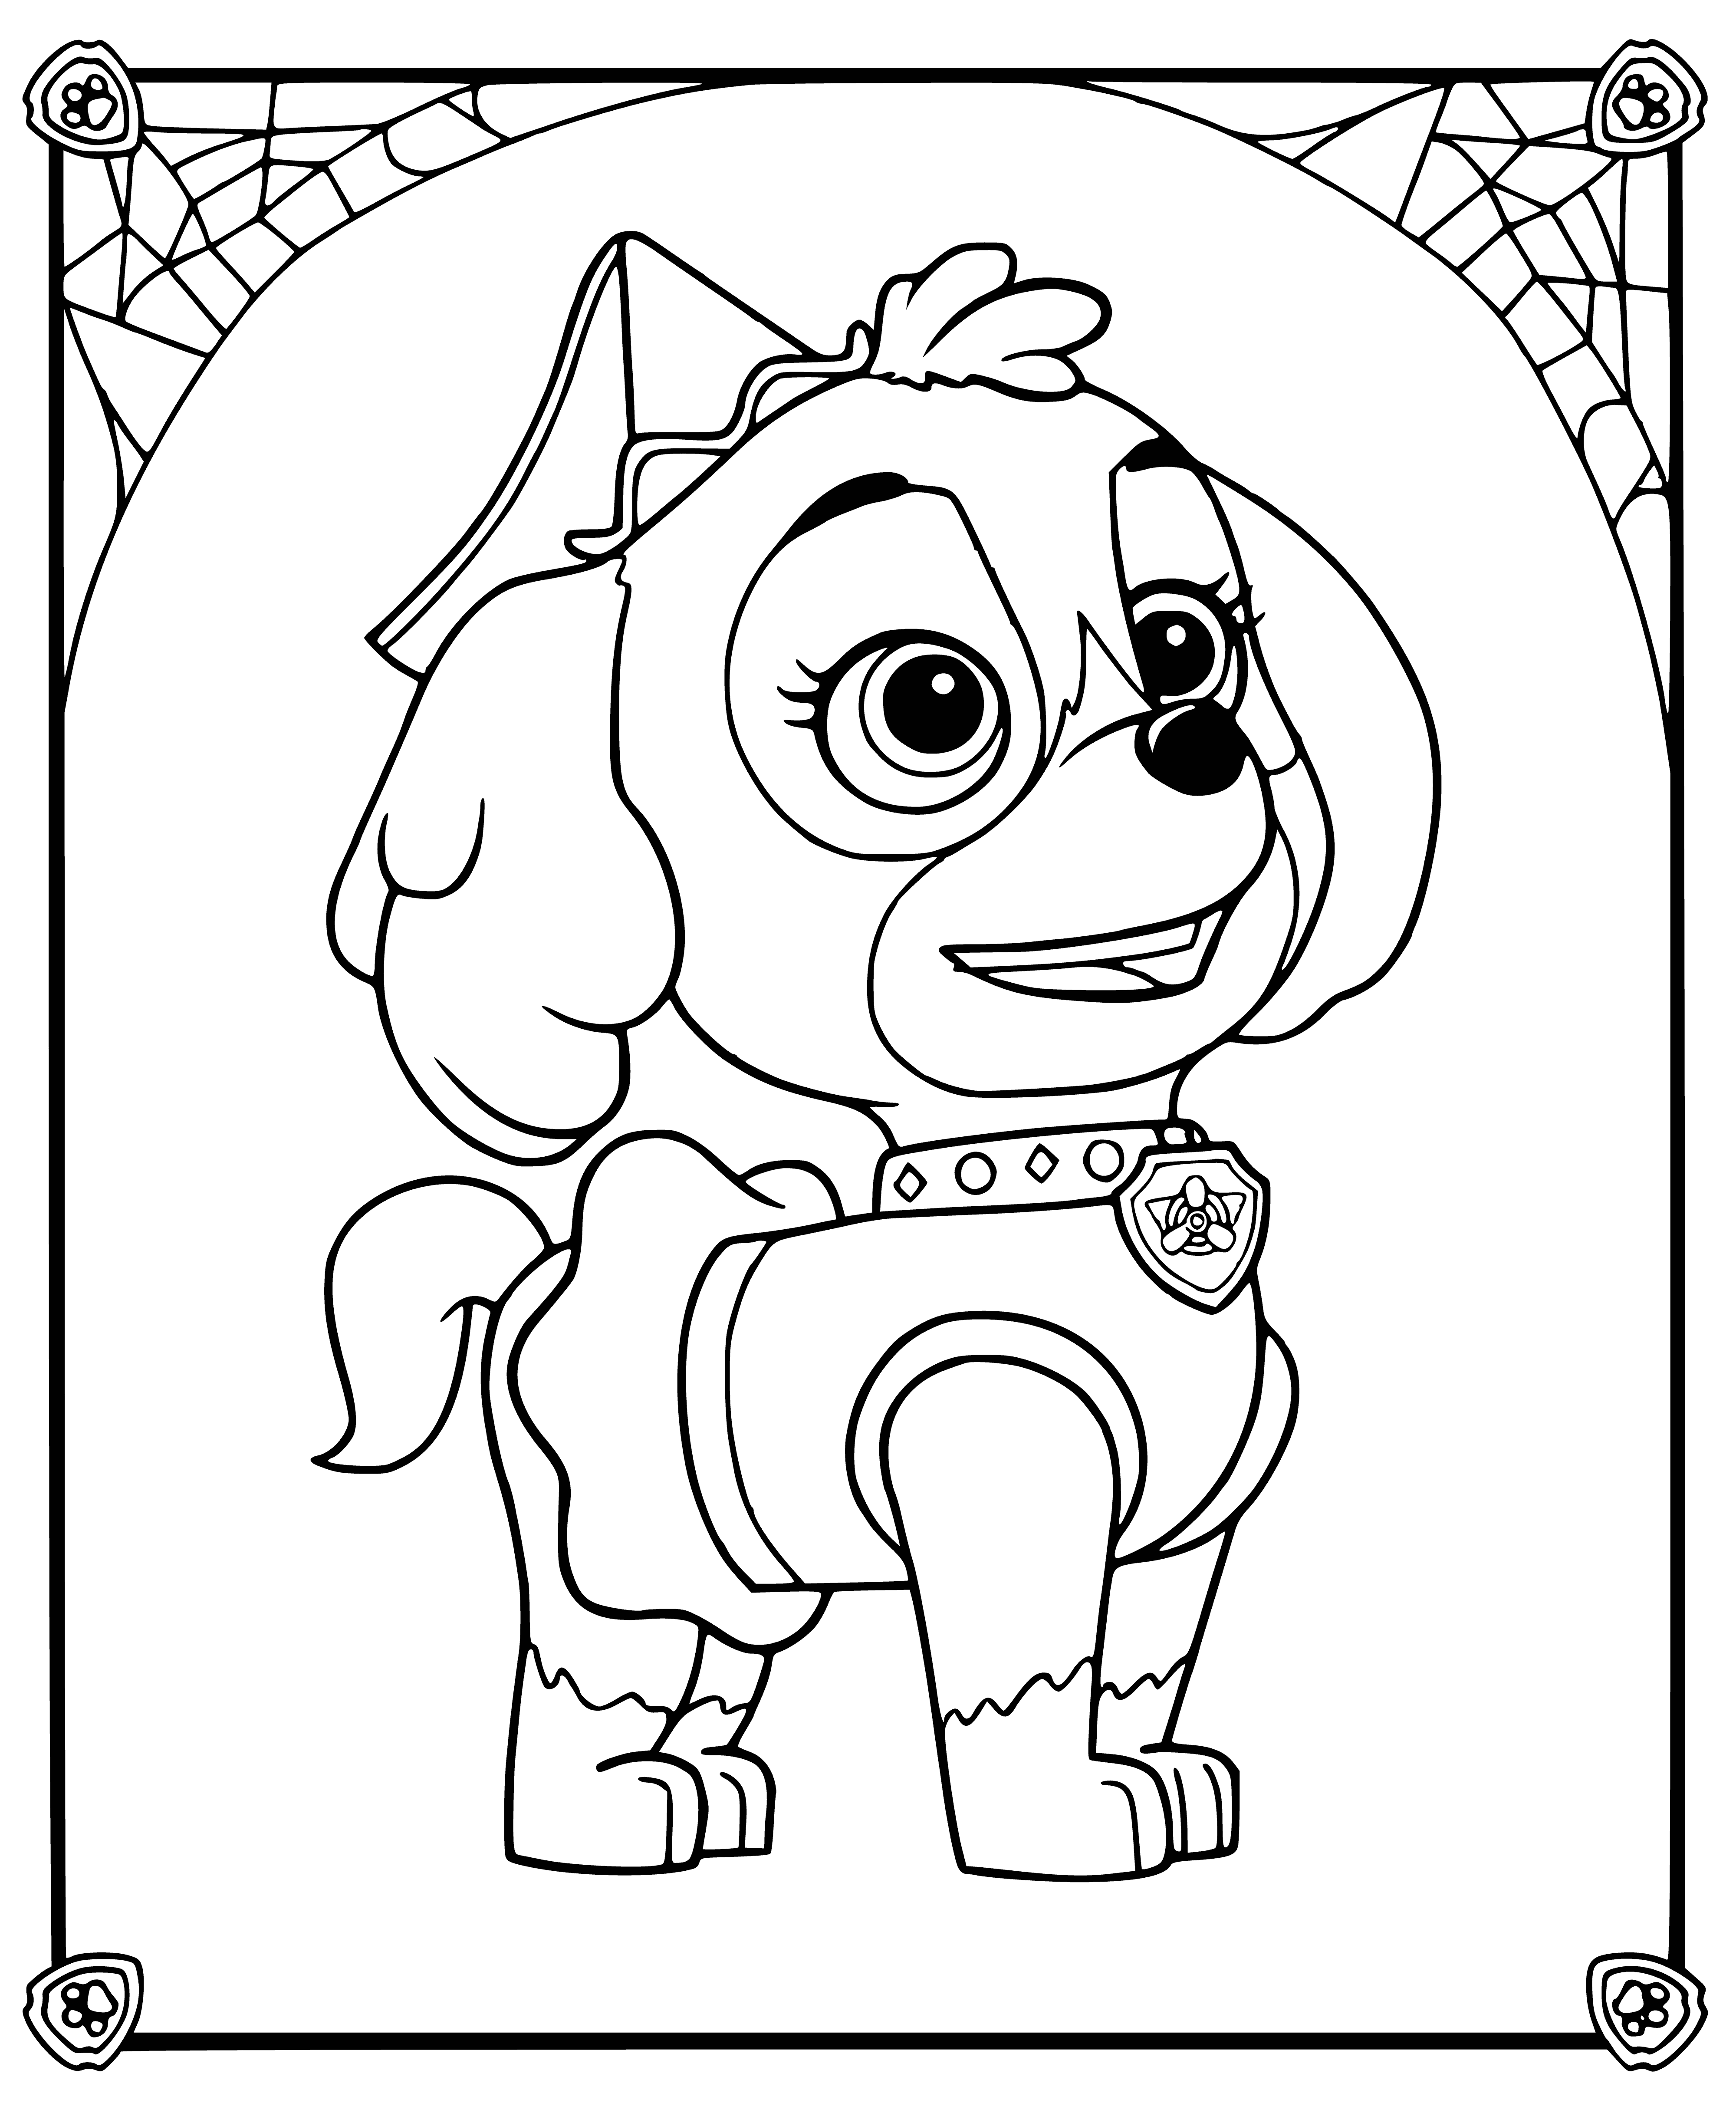 coloring page: The Paw Patrol is a group of four animals flying in a Princess airplane in colorful outfits: a red-caped dog, a green-caped cat, a purple-caped rabbit, and an orange-caped turtle!